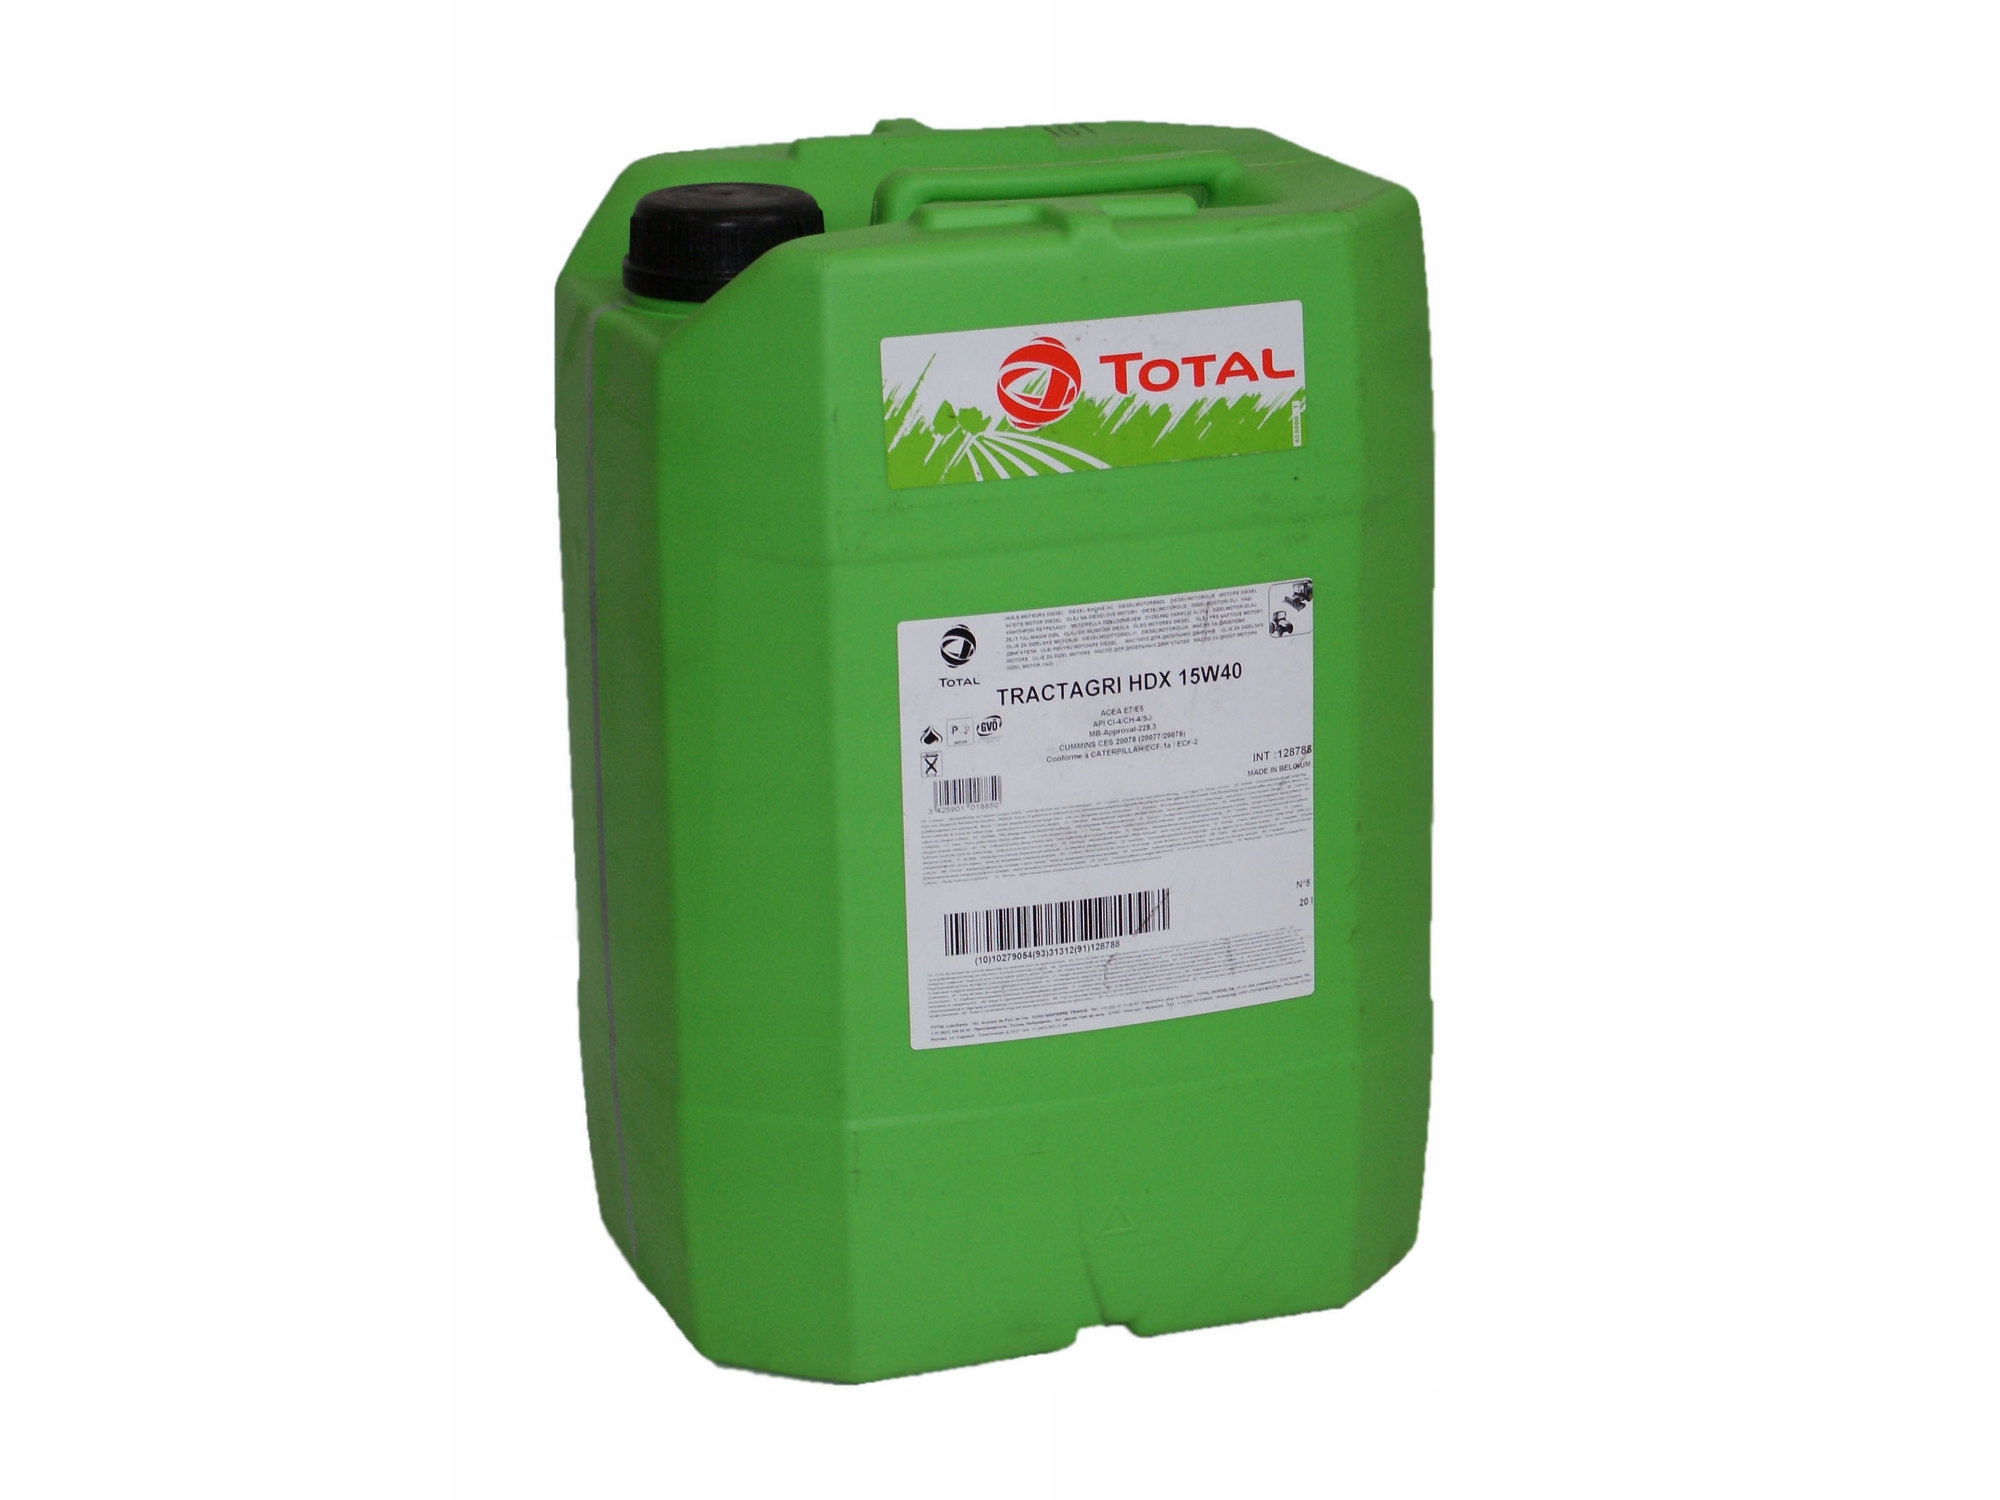 Total TRACTAGRI hdx 15w40 канистра 20л. W15l20 40a. Моторное масло total TRACTAGRI hdx syn 10w40 20 л. Моторное масло total TRACTAGRI HDM 15w40 20 л. Масло 15w40 отзывы